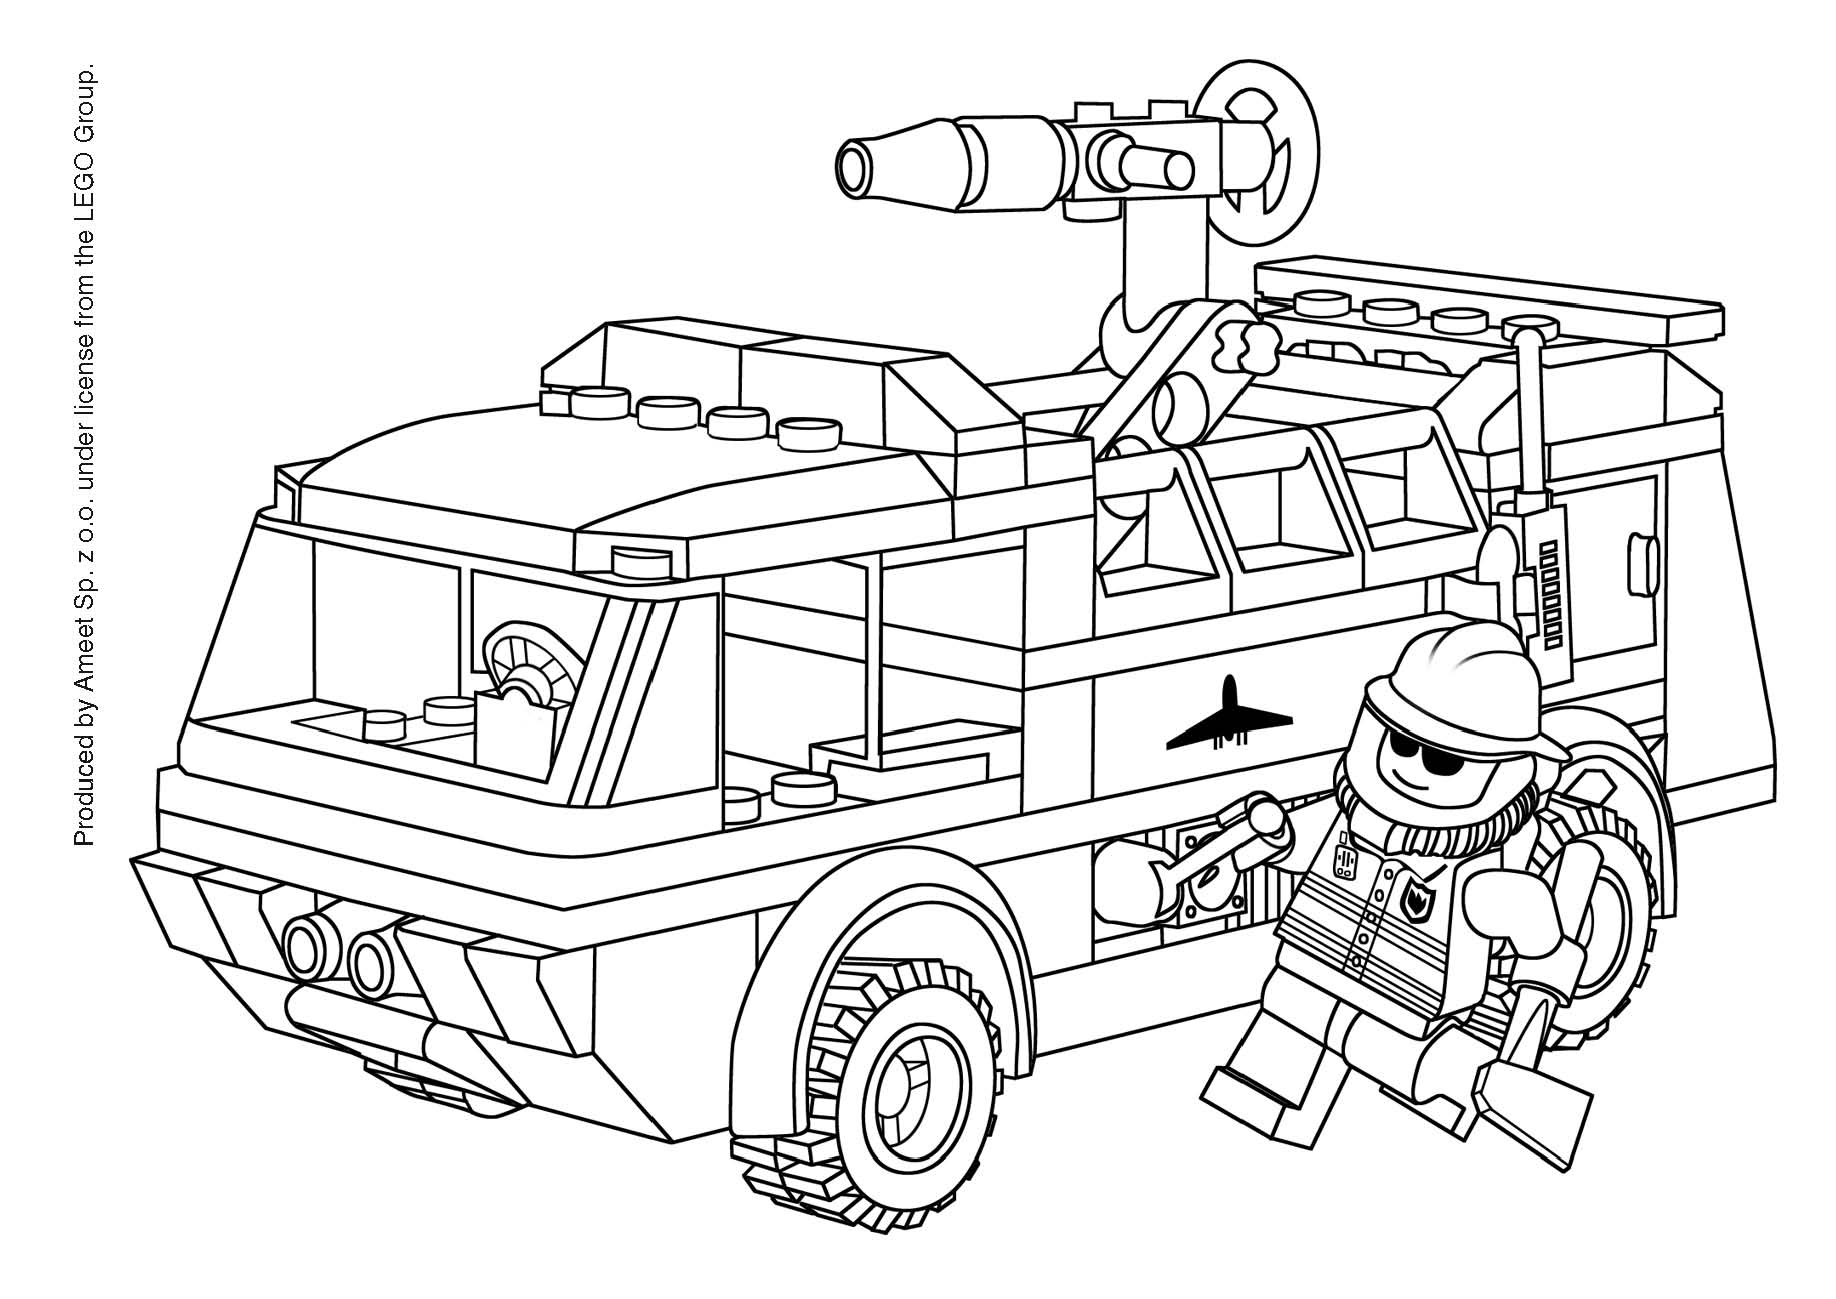 Firetruck #135785 (Transportation) – Printable coloring pages